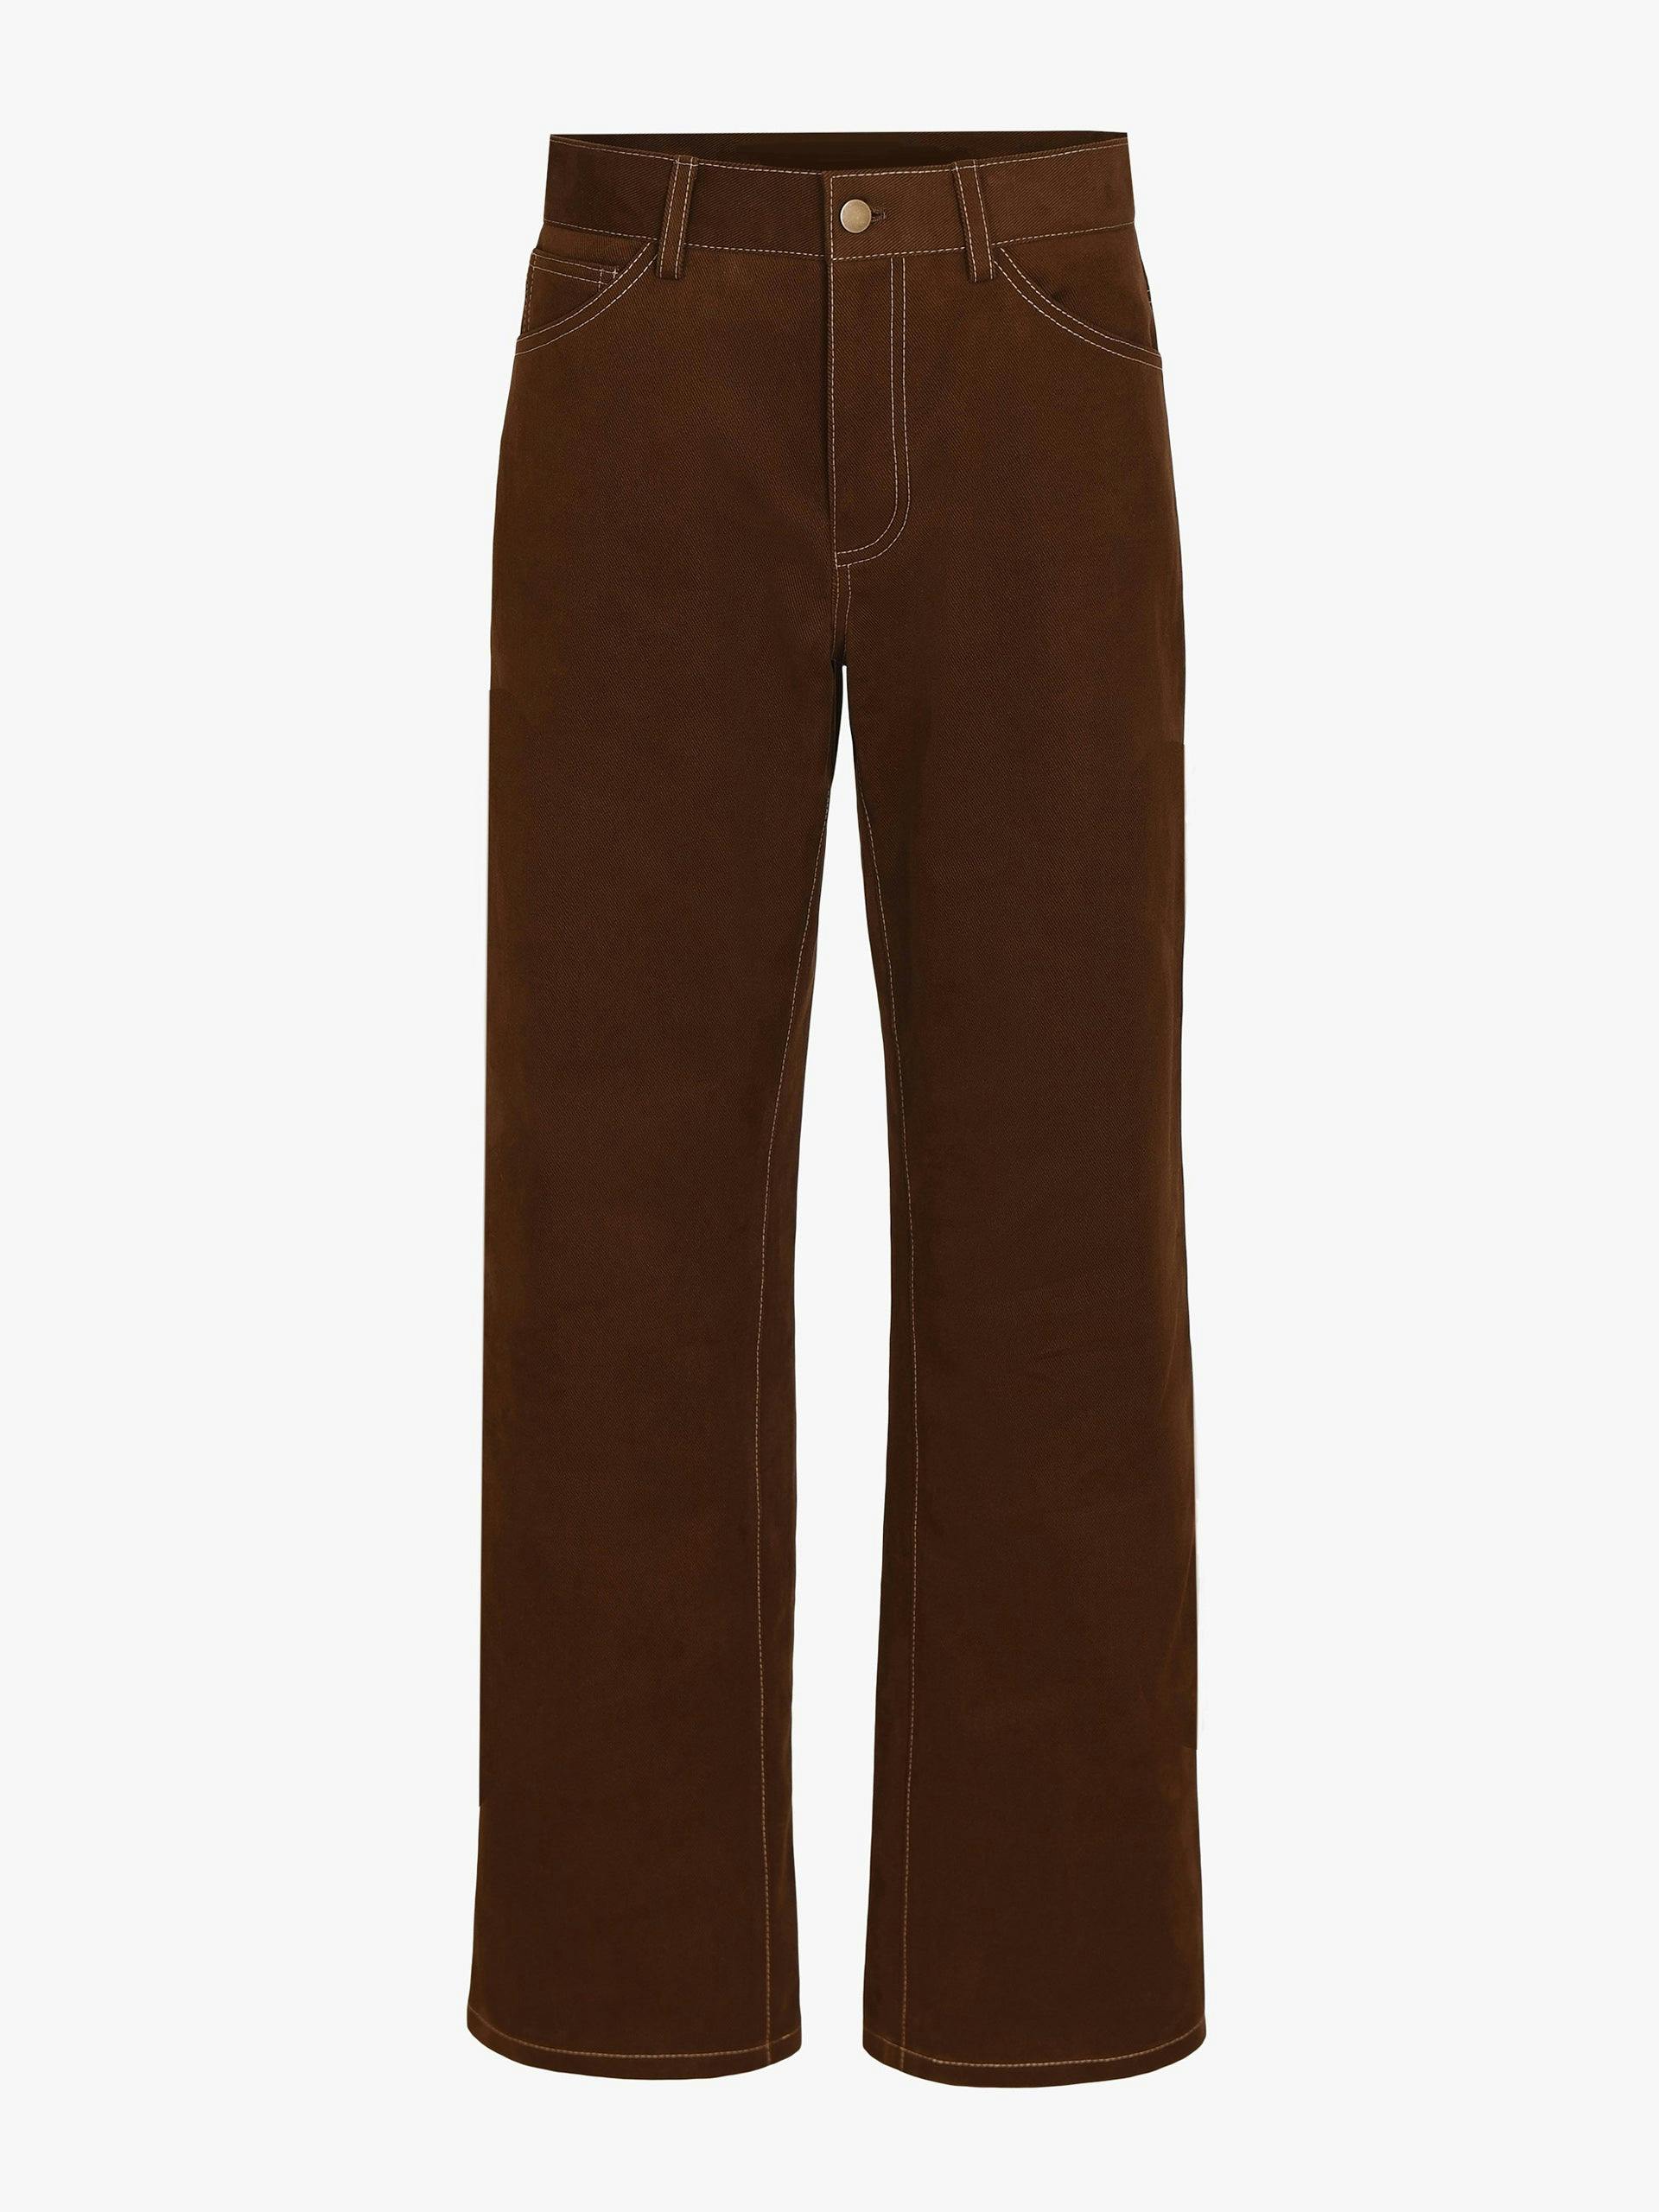 Lenny brown brushed cotton trousers